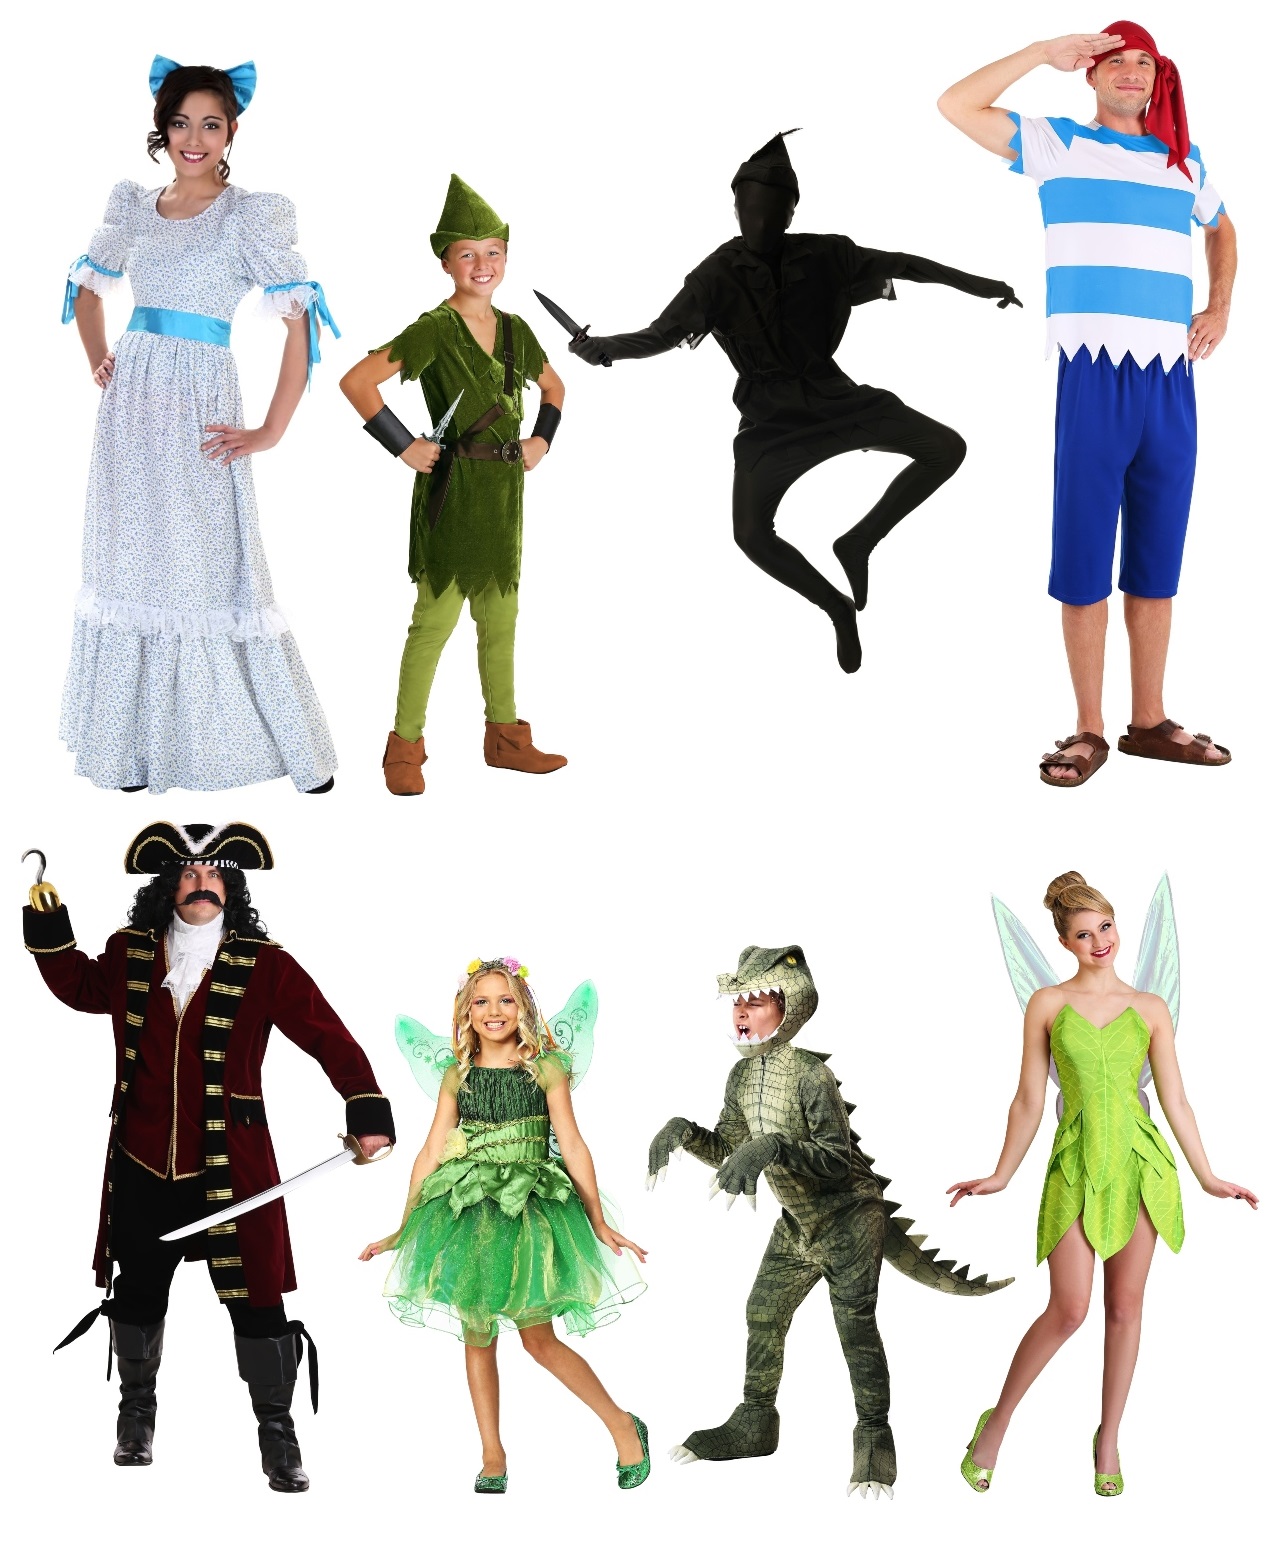 Fairytale and Storybook Costumes for a Happily Ever After [Costume Guide] -   Blog